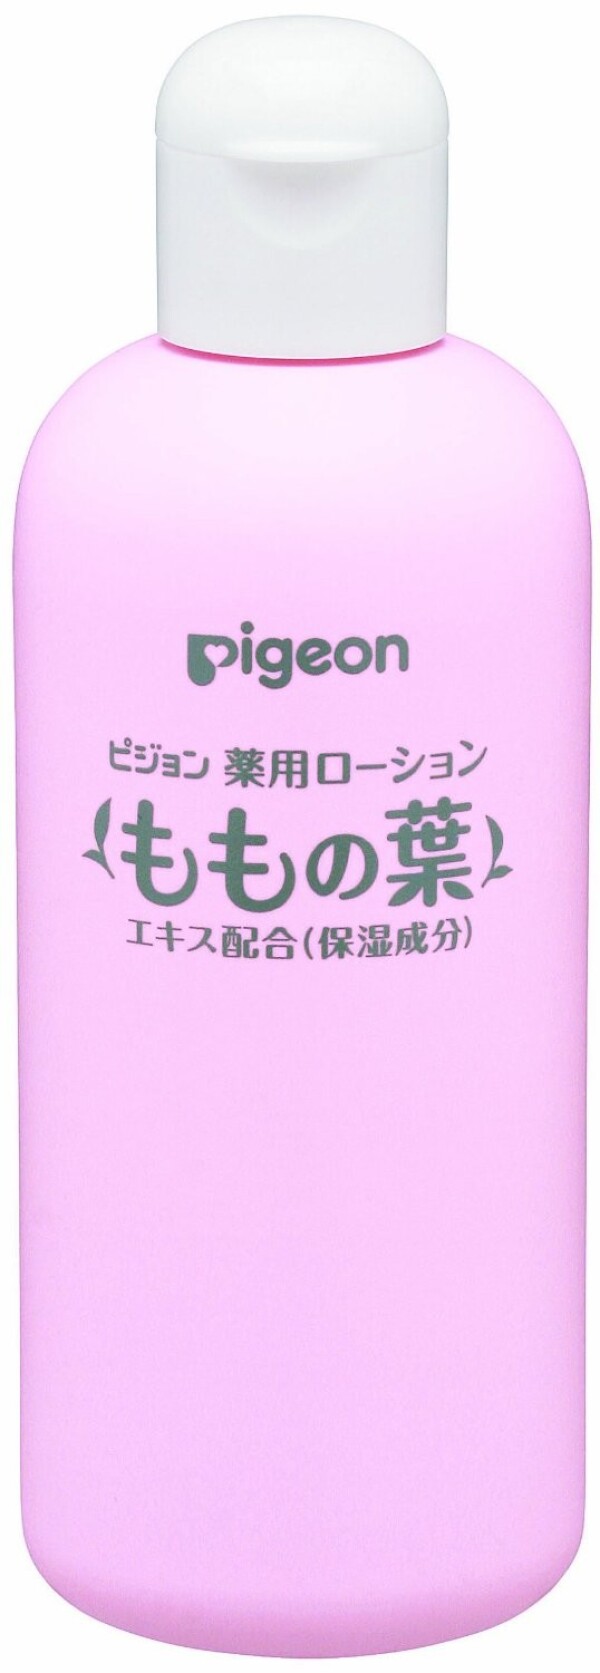 Pigeon Peach Leaves Moisturizing & Soothing Lotion